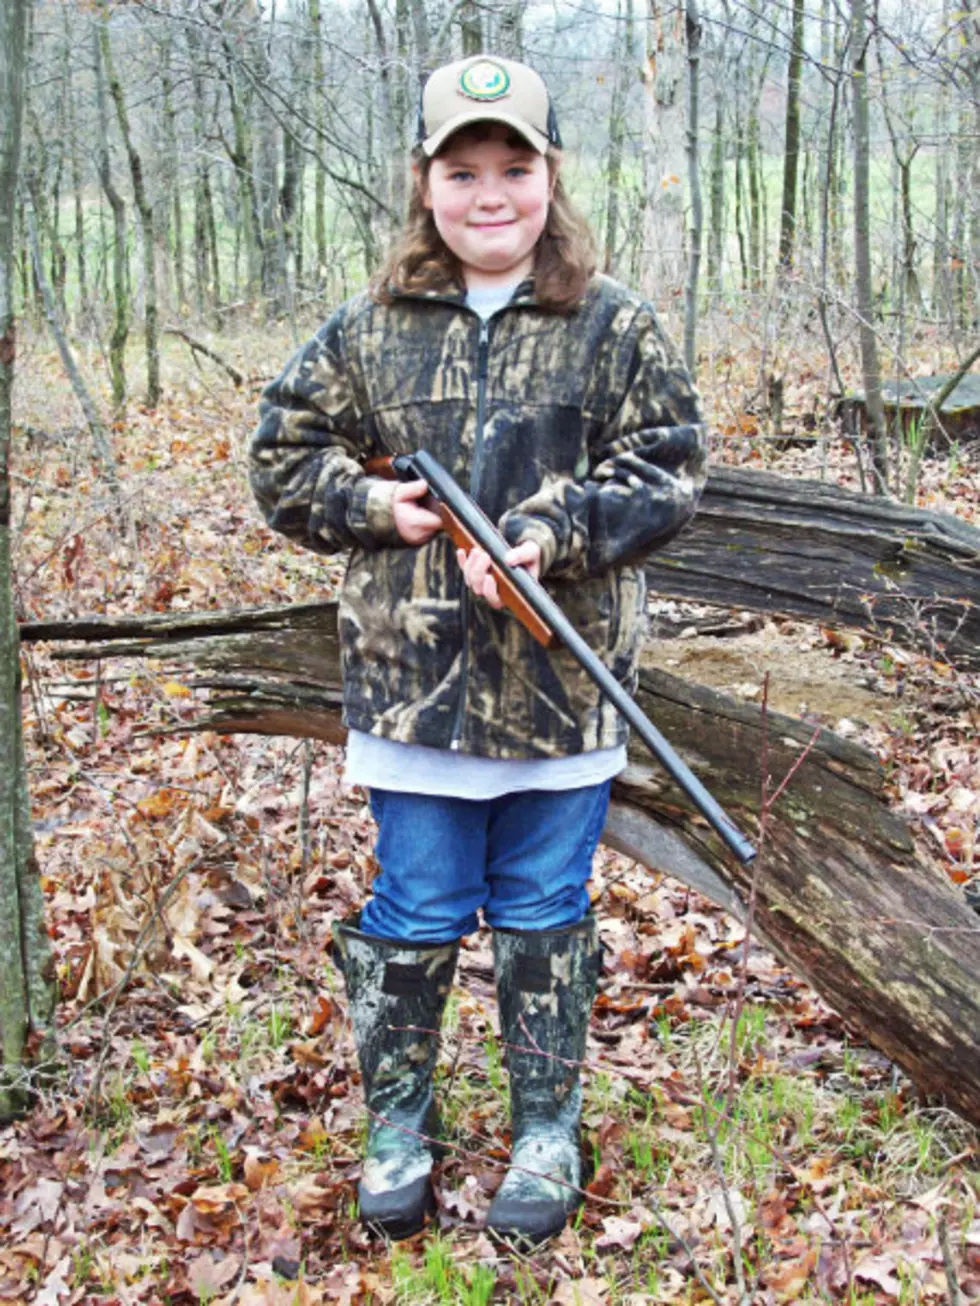 Rabbit & Squirrel Derby Gets Kids Out Hunting